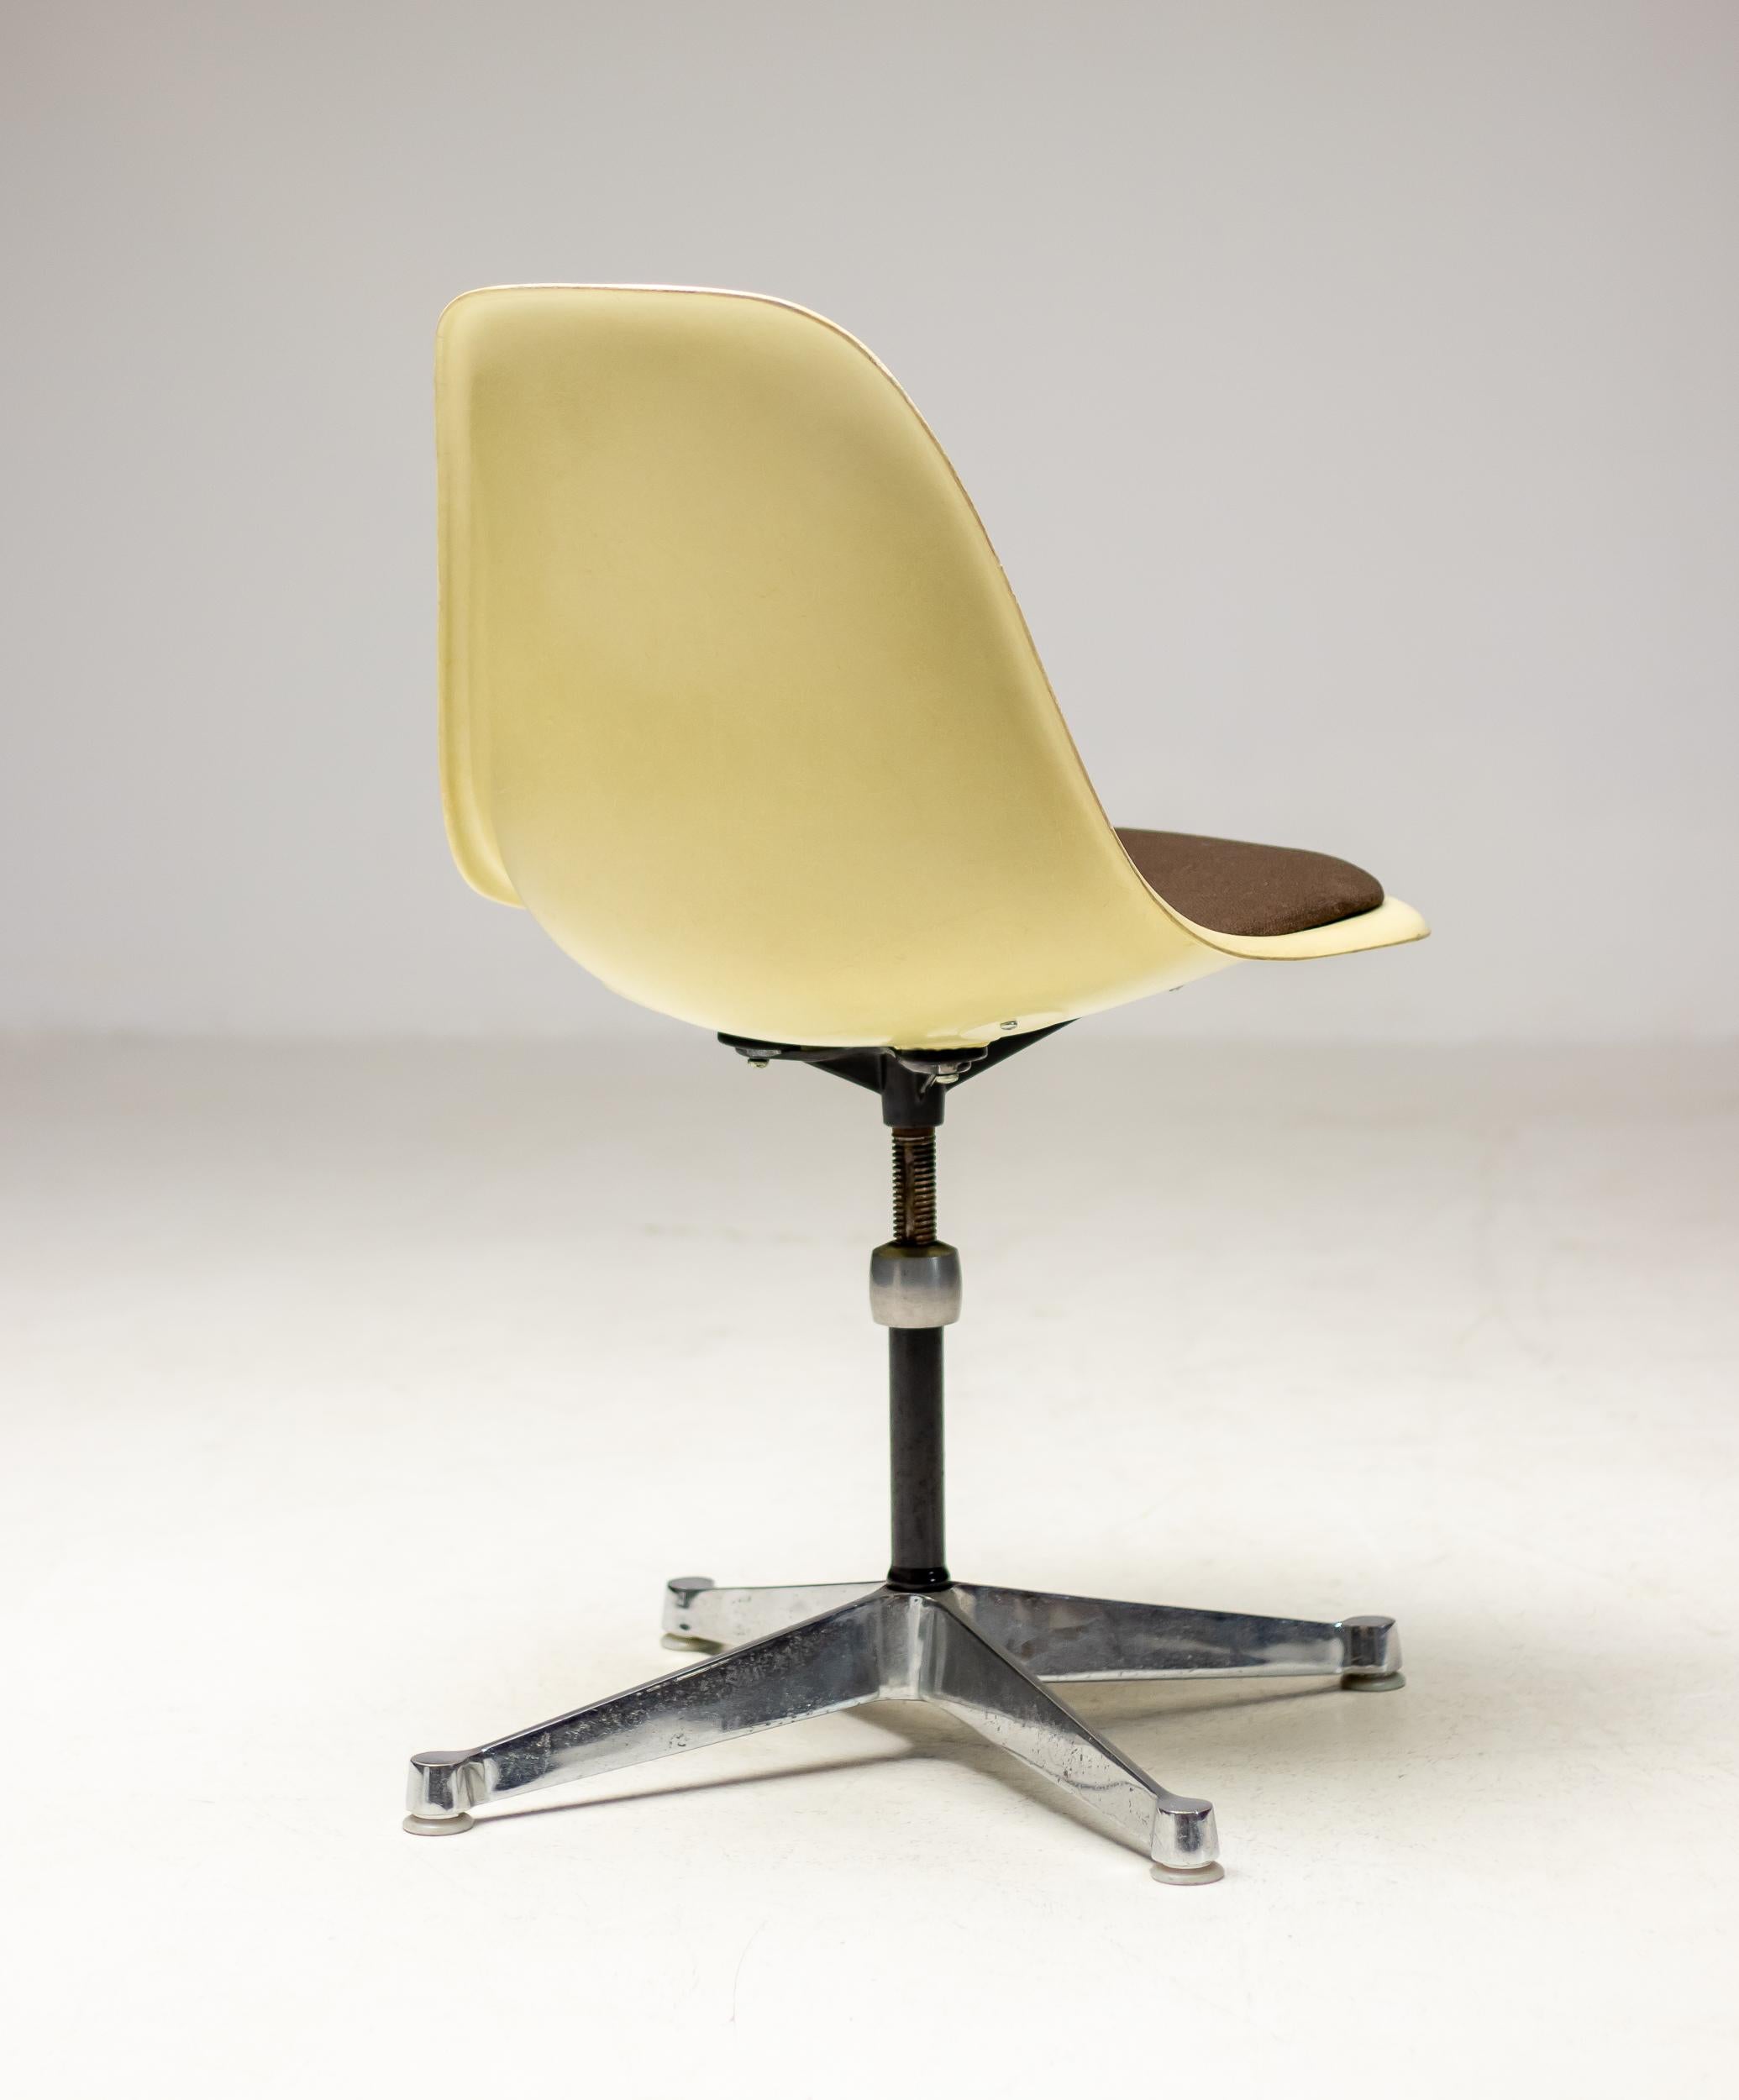 Swiveling parchment fiberglass side chair designed by Charles and Ray Eames for Herman Miller.
Original desirable 1960s version with seat pad with brown fabric, easy to reupholster when desired.
Height adjustable, marked Herman Miller under the seat.